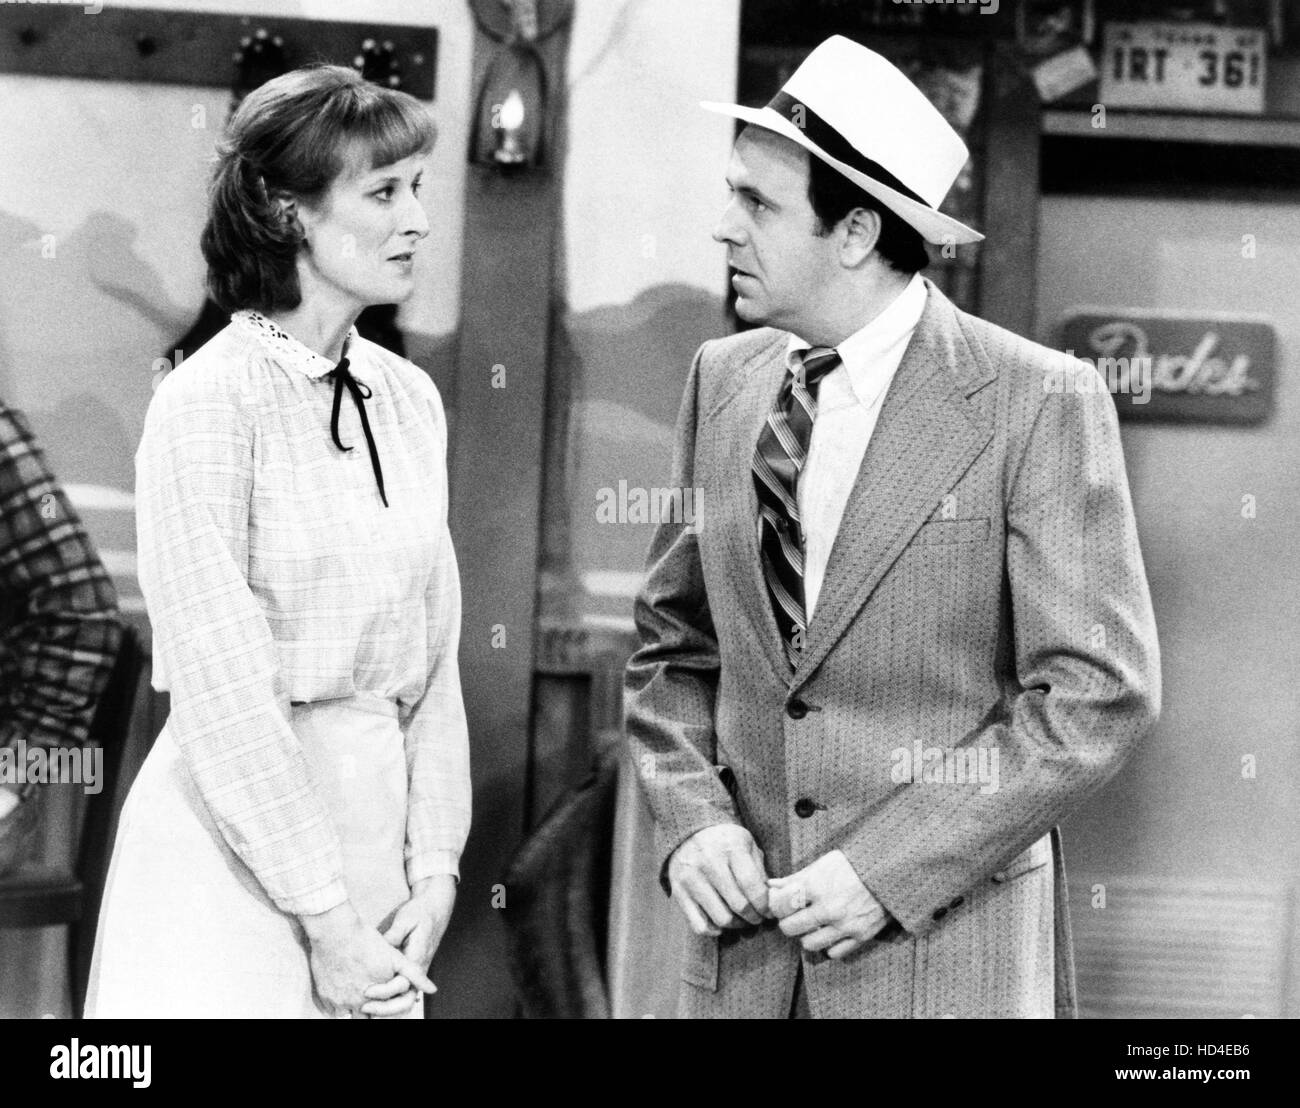 FLO, (from left): Lucy Lee Flippin, Terry Willis, (Season 1), 1980-81. ©  CBS / Courtesy: Everett Collection Stock Photo - Alamy